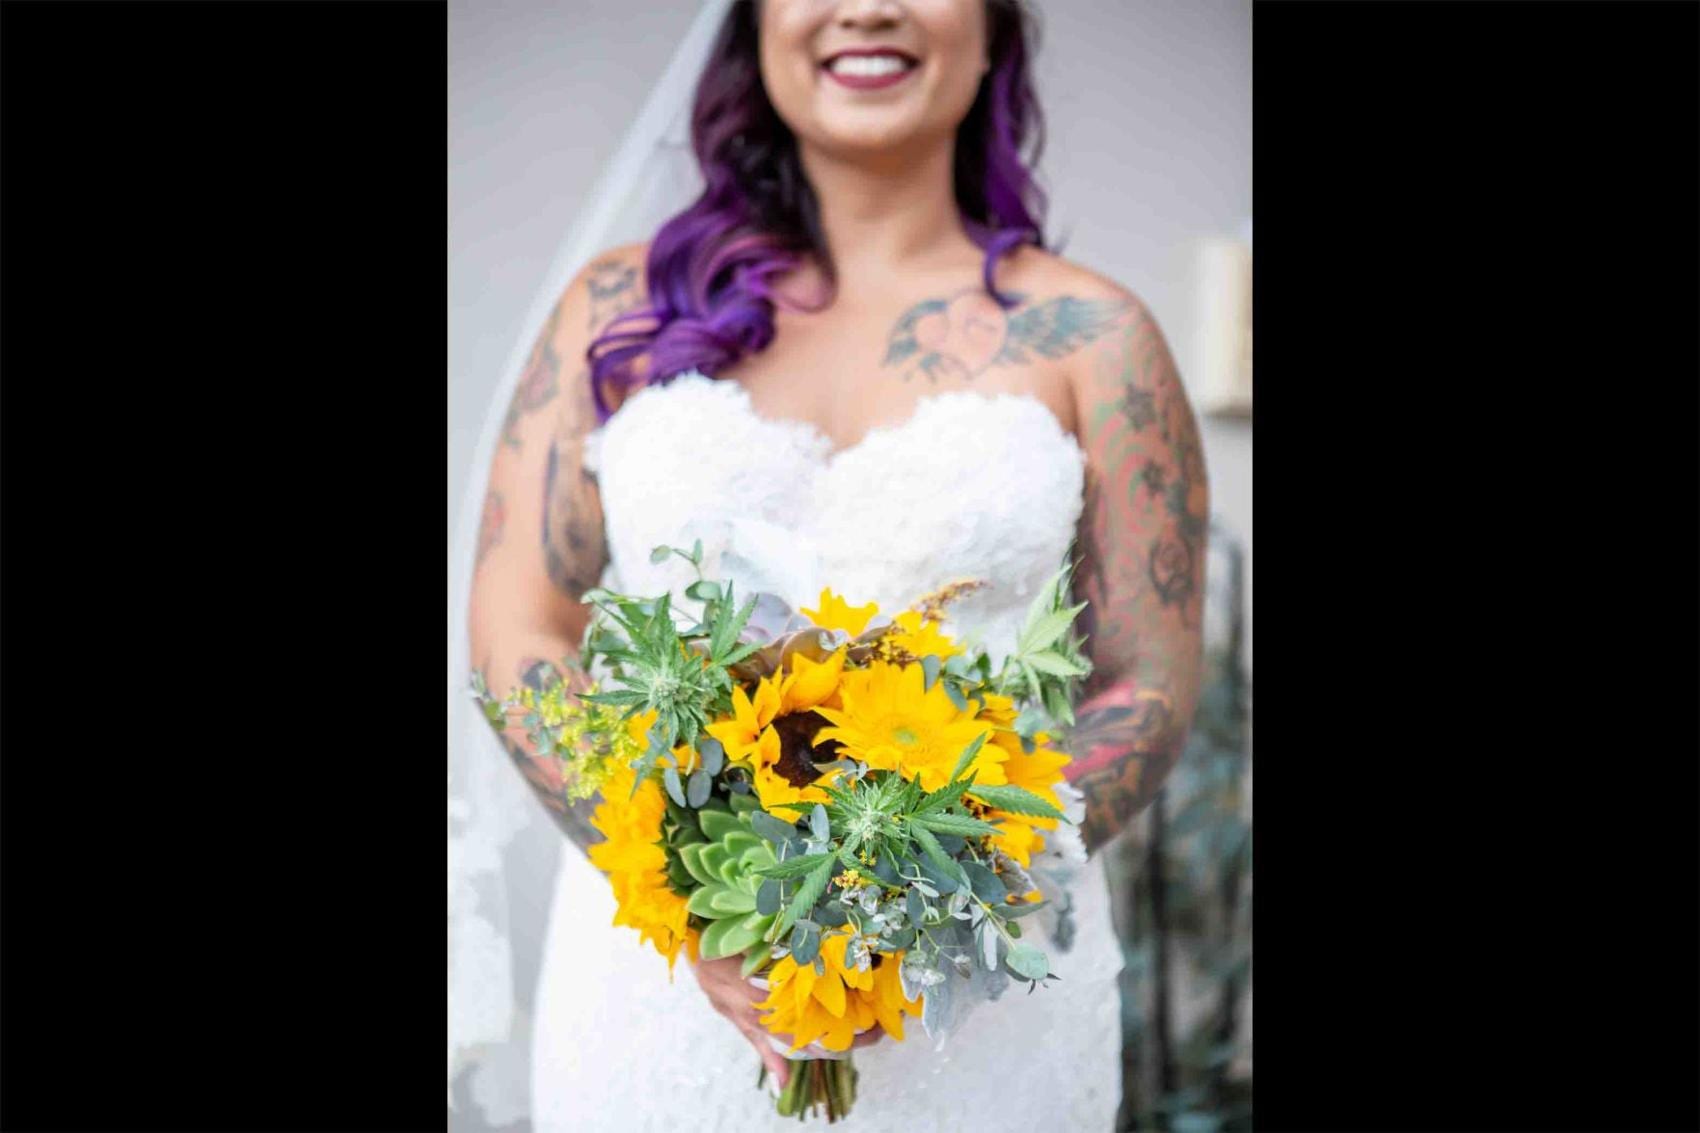 Pot shop’s bouquets can keep bride high on love